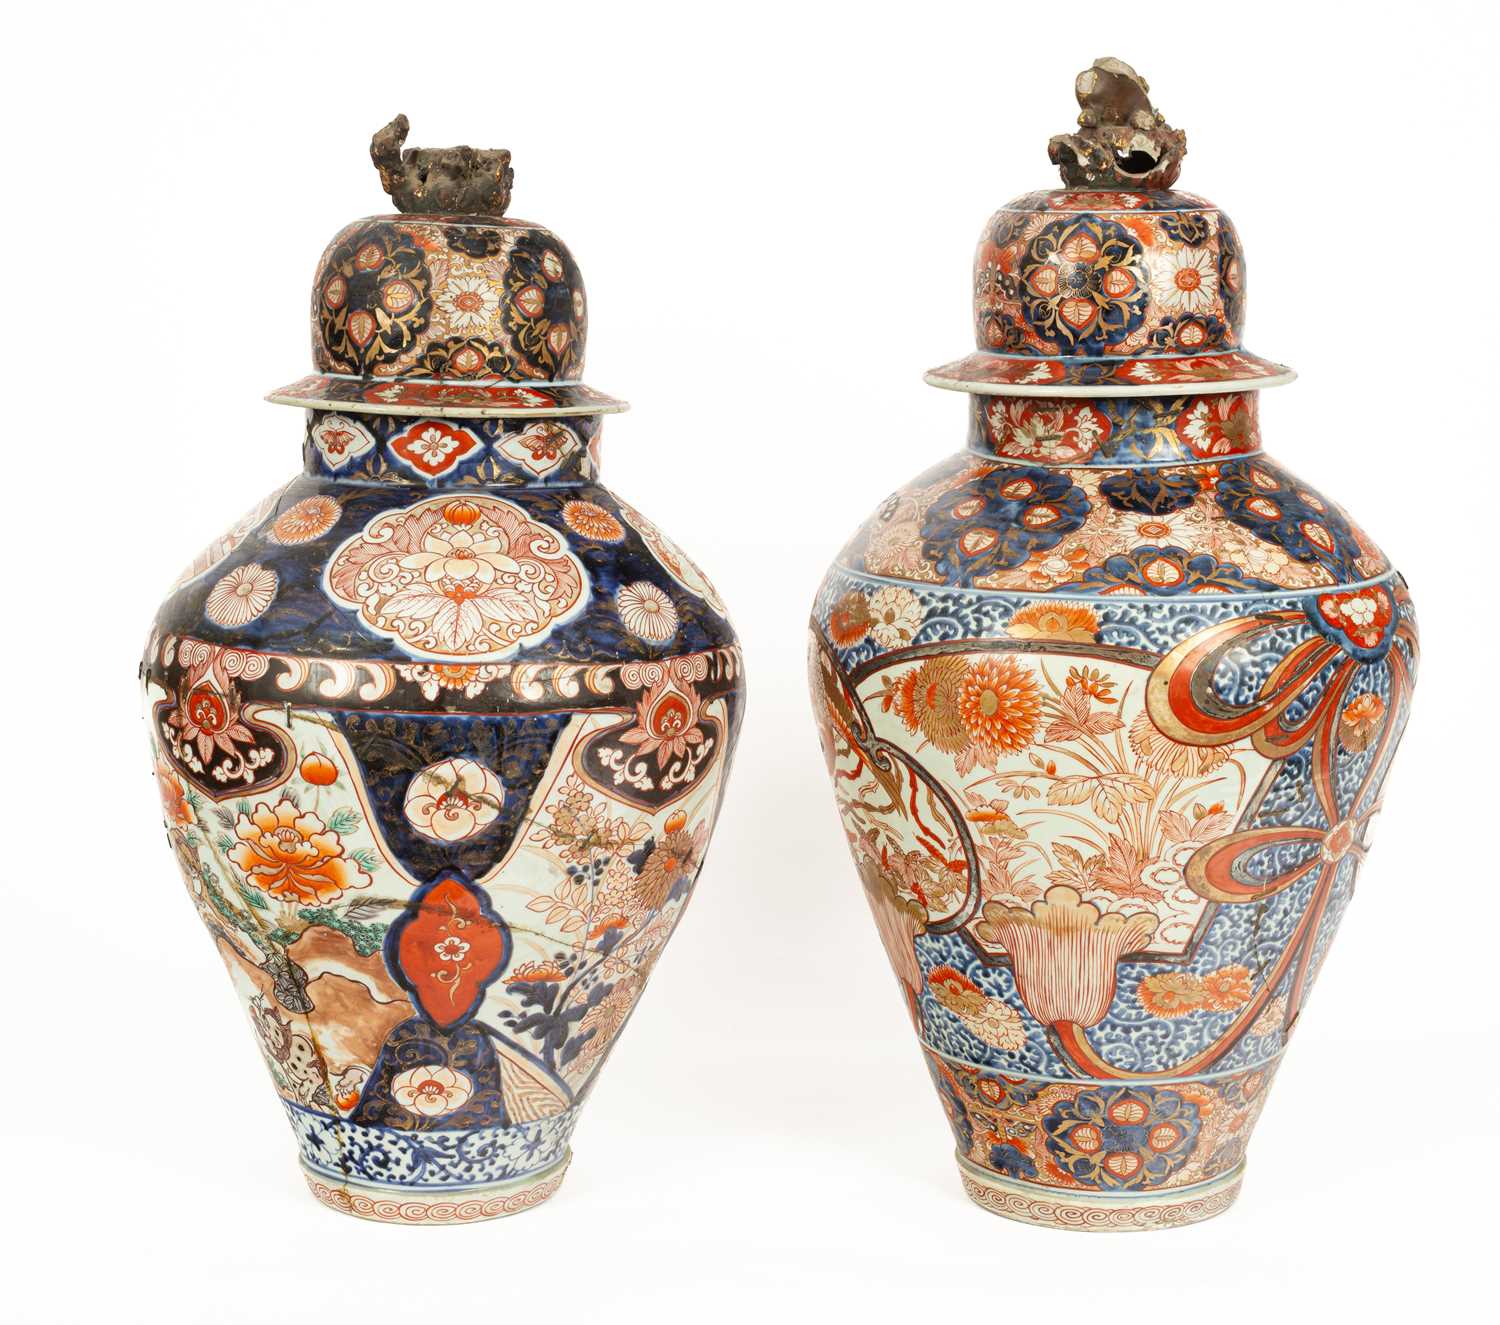 Two Japanese Imari large baluster vases with domed covers - Image 3 of 25